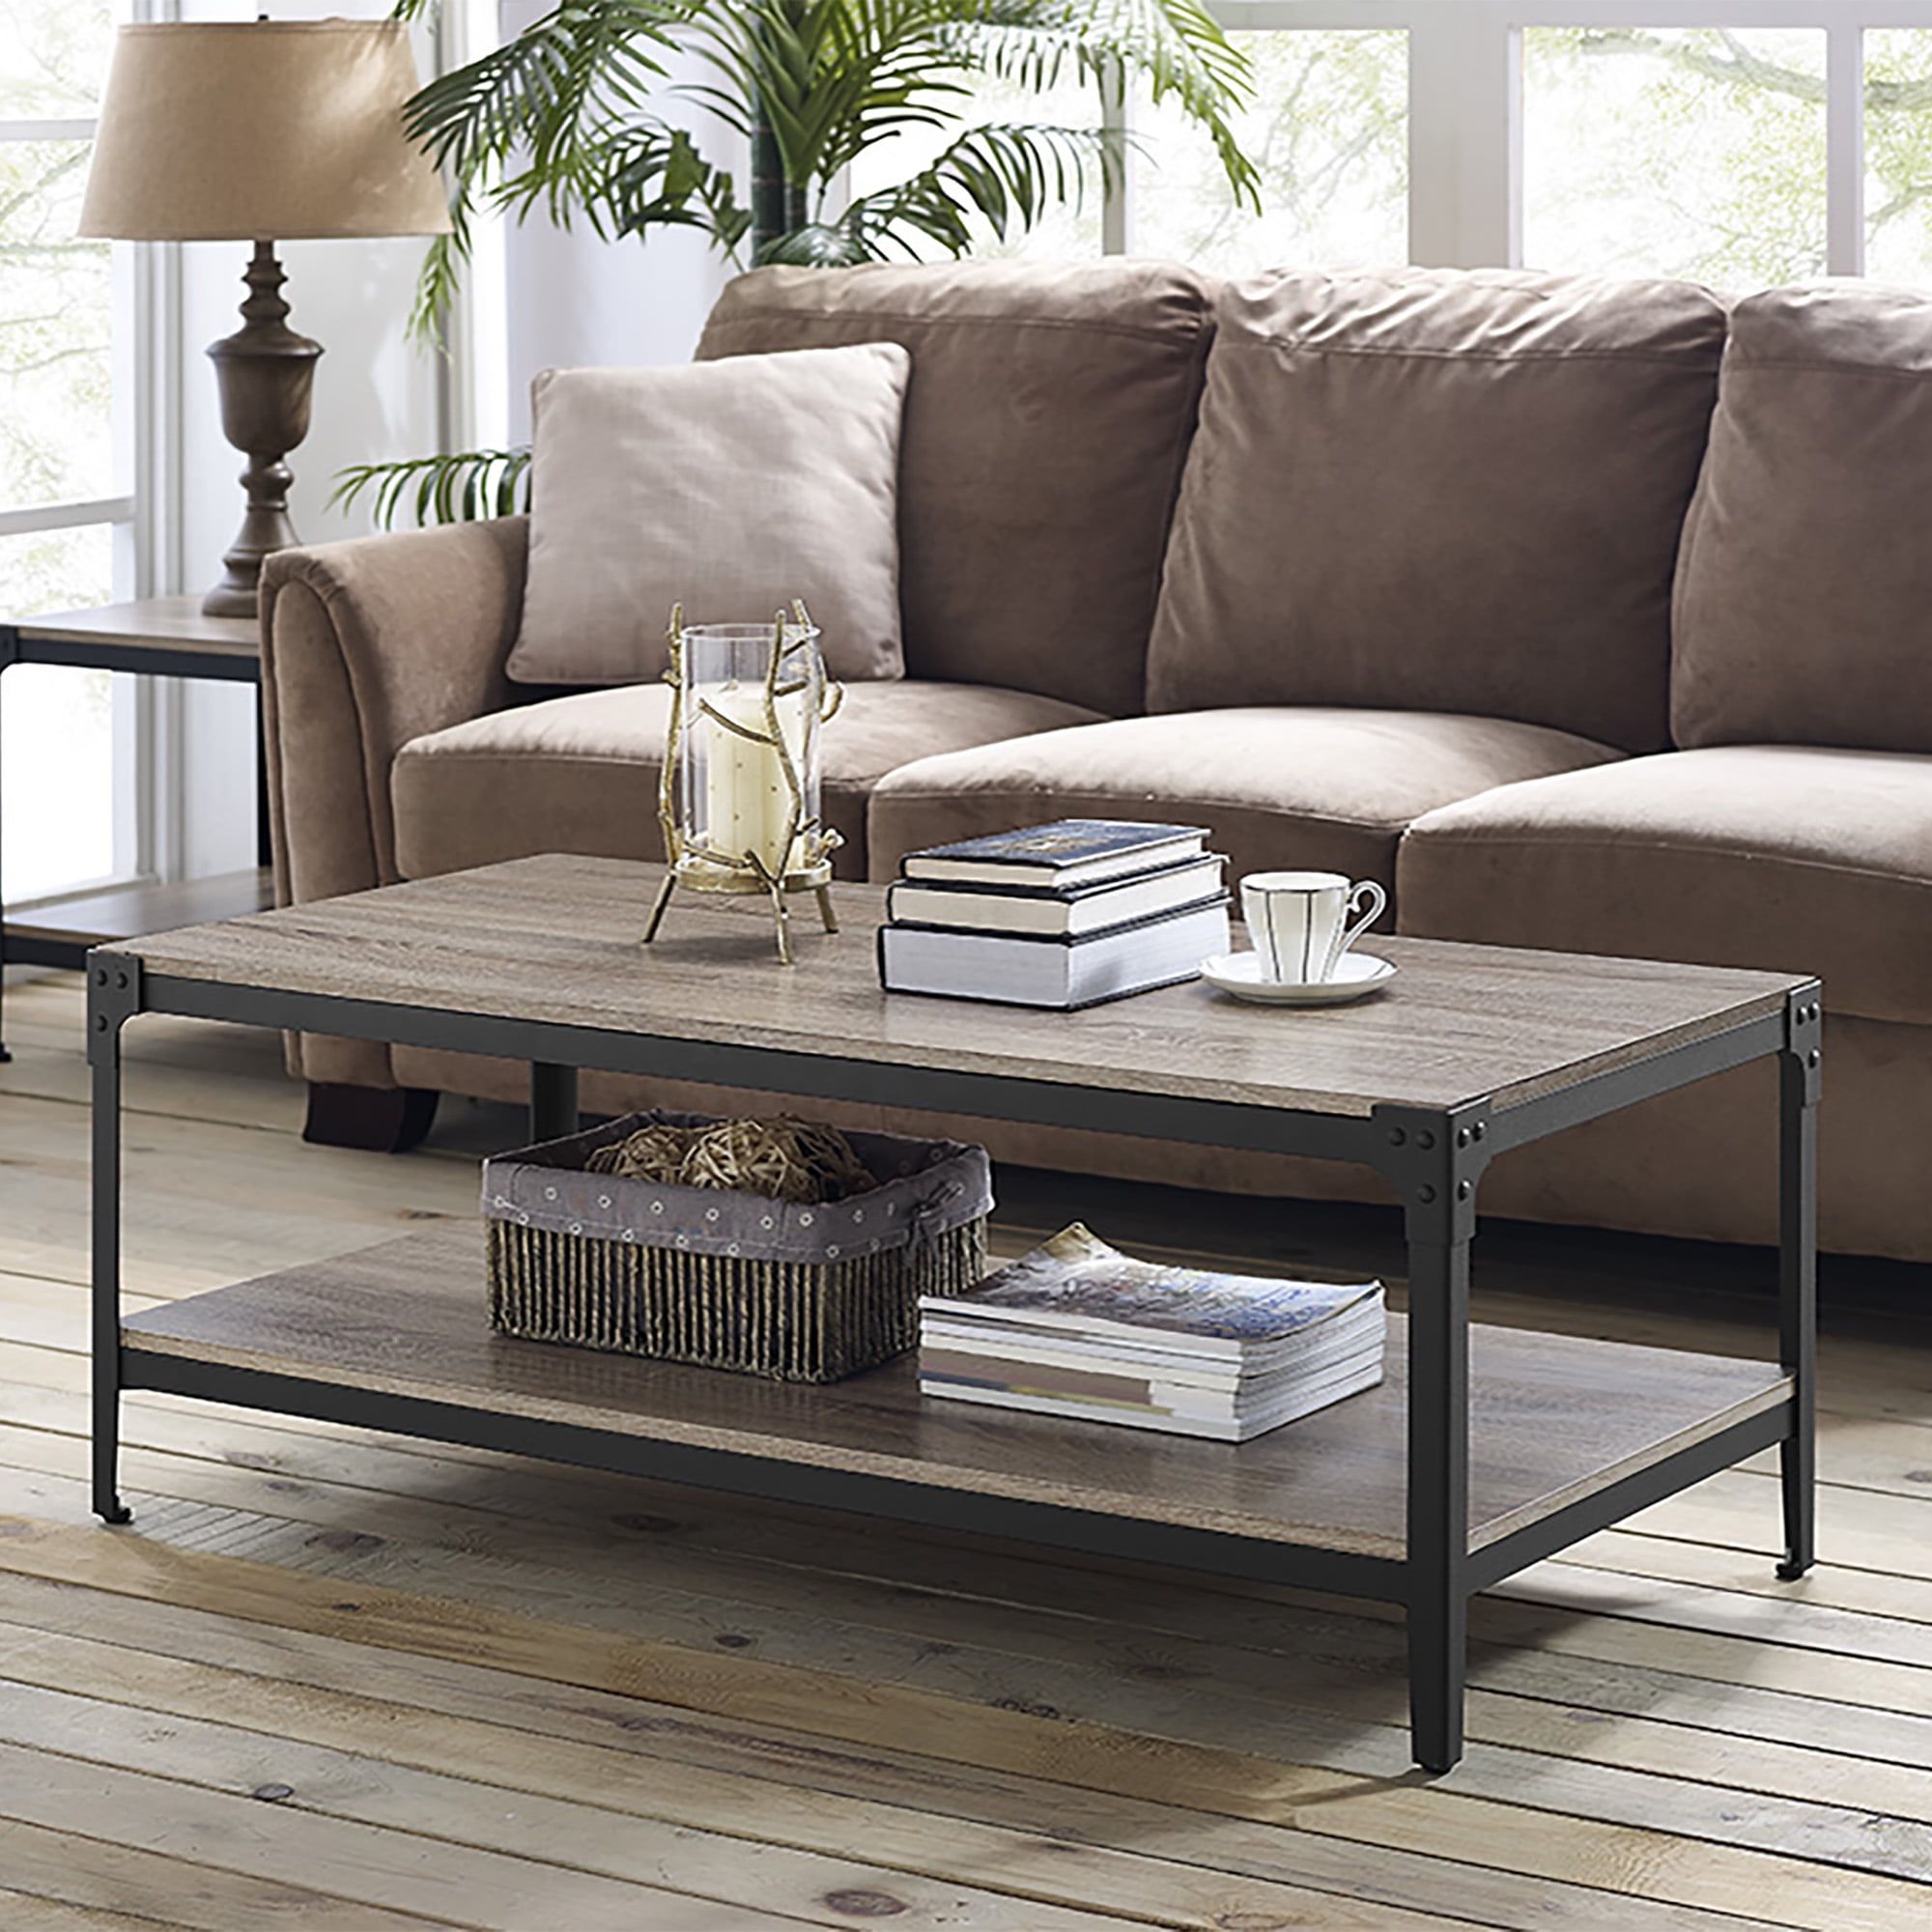 Woven Paths Wilson Angle Iron Rustic Coffee Table, Driftwood – Walmart Throughout Woven Paths Coffee Tables (View 14 of 20)